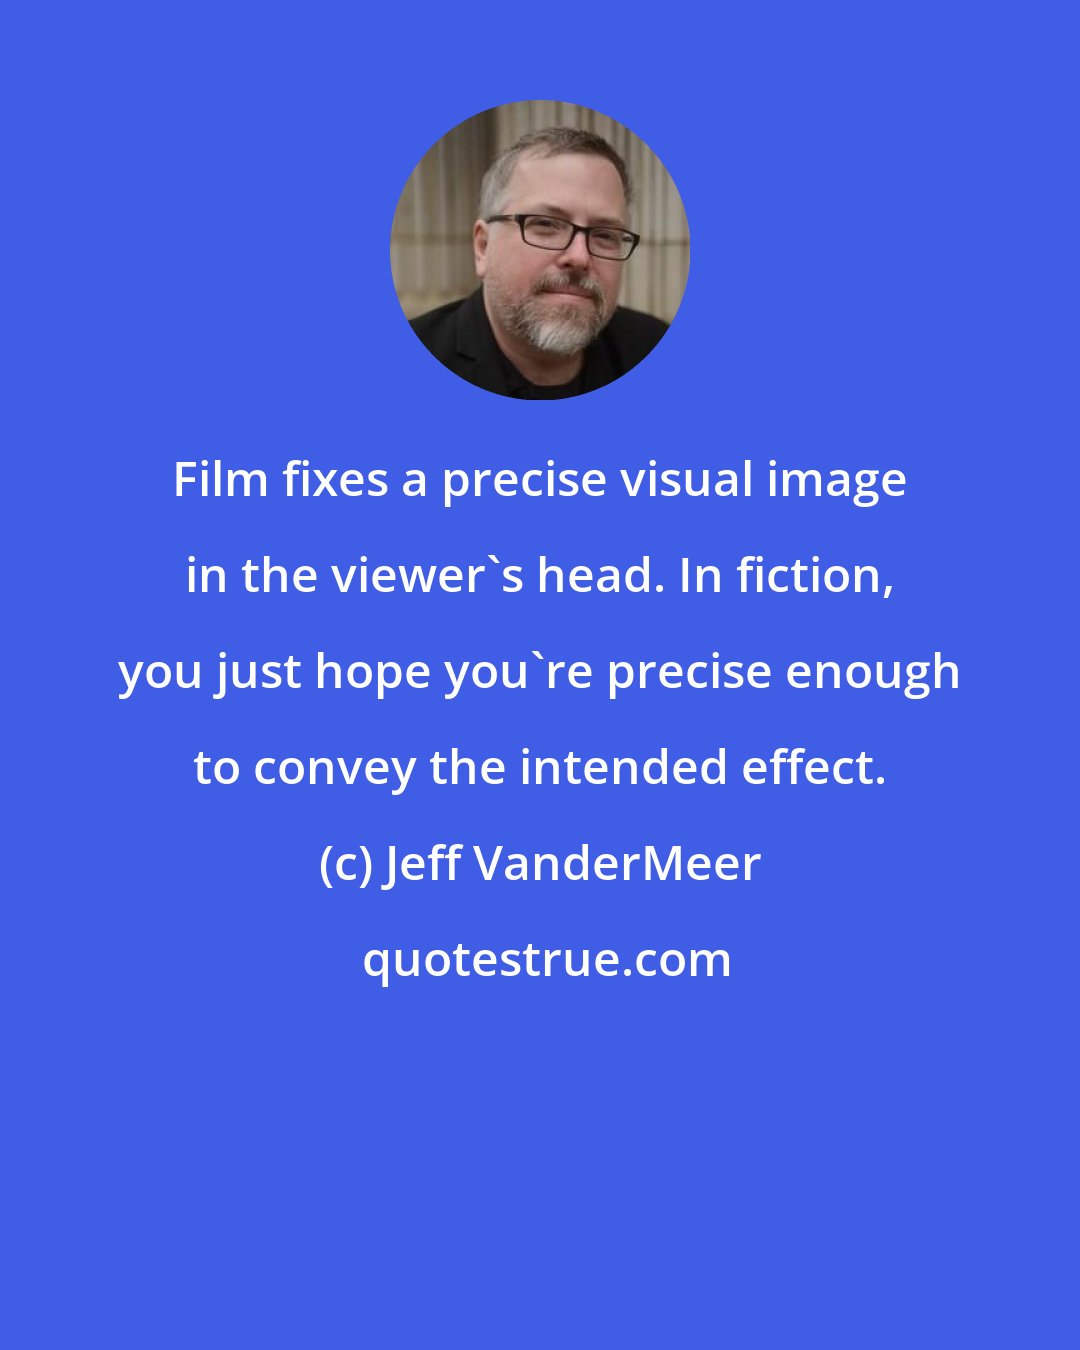 Jeff VanderMeer: Film fixes a precise visual image in the viewer's head. In fiction, you just hope you're precise enough to convey the intended effect.